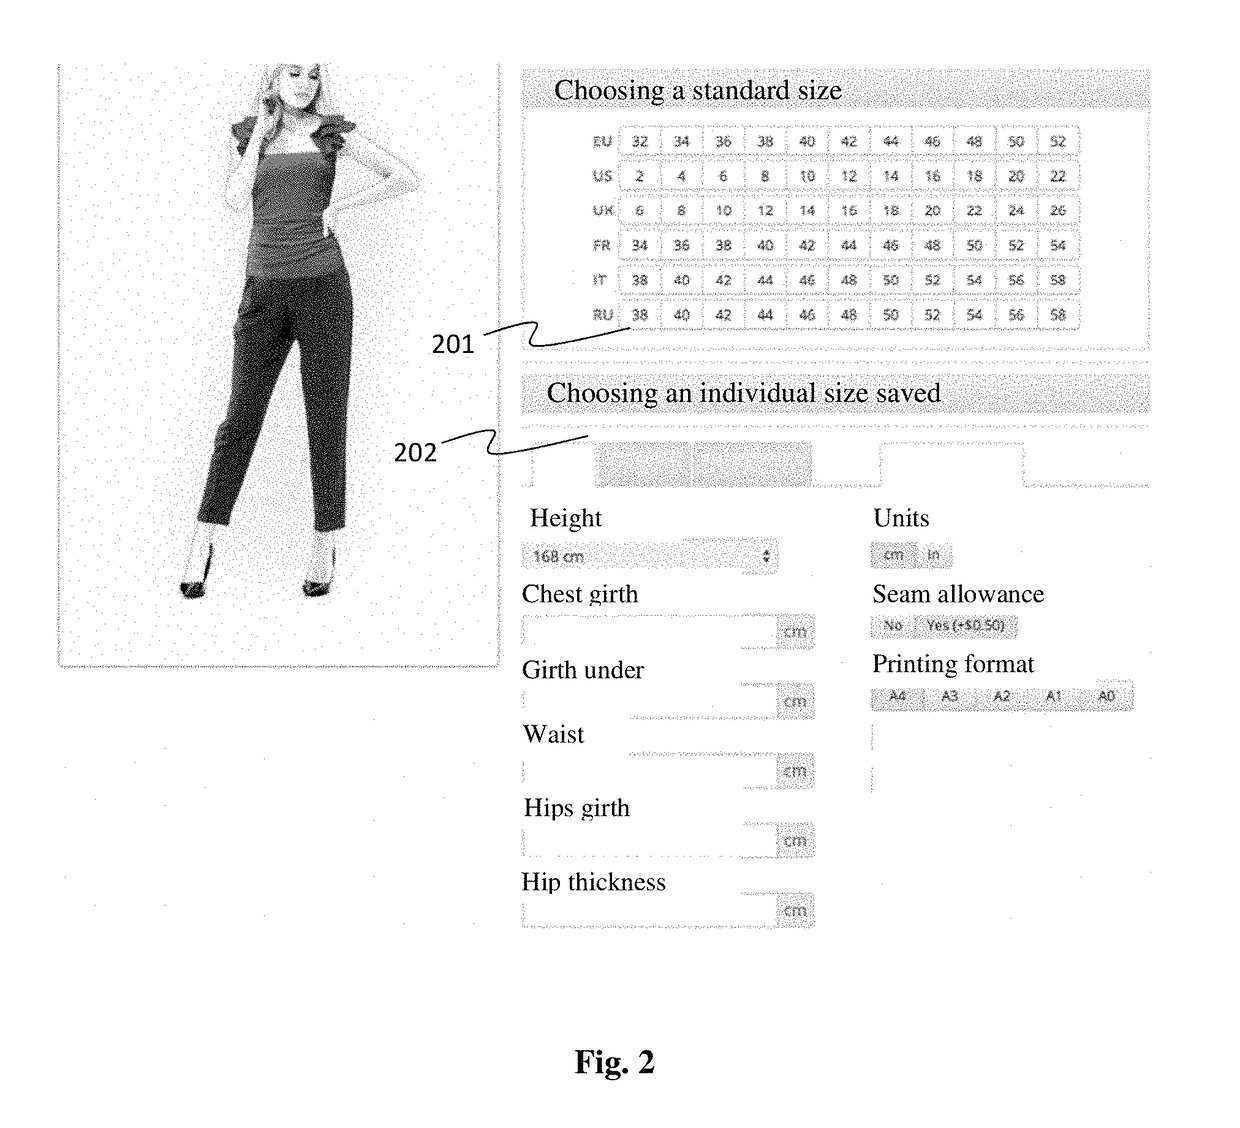 Method and System for Interactive Creation of Garments